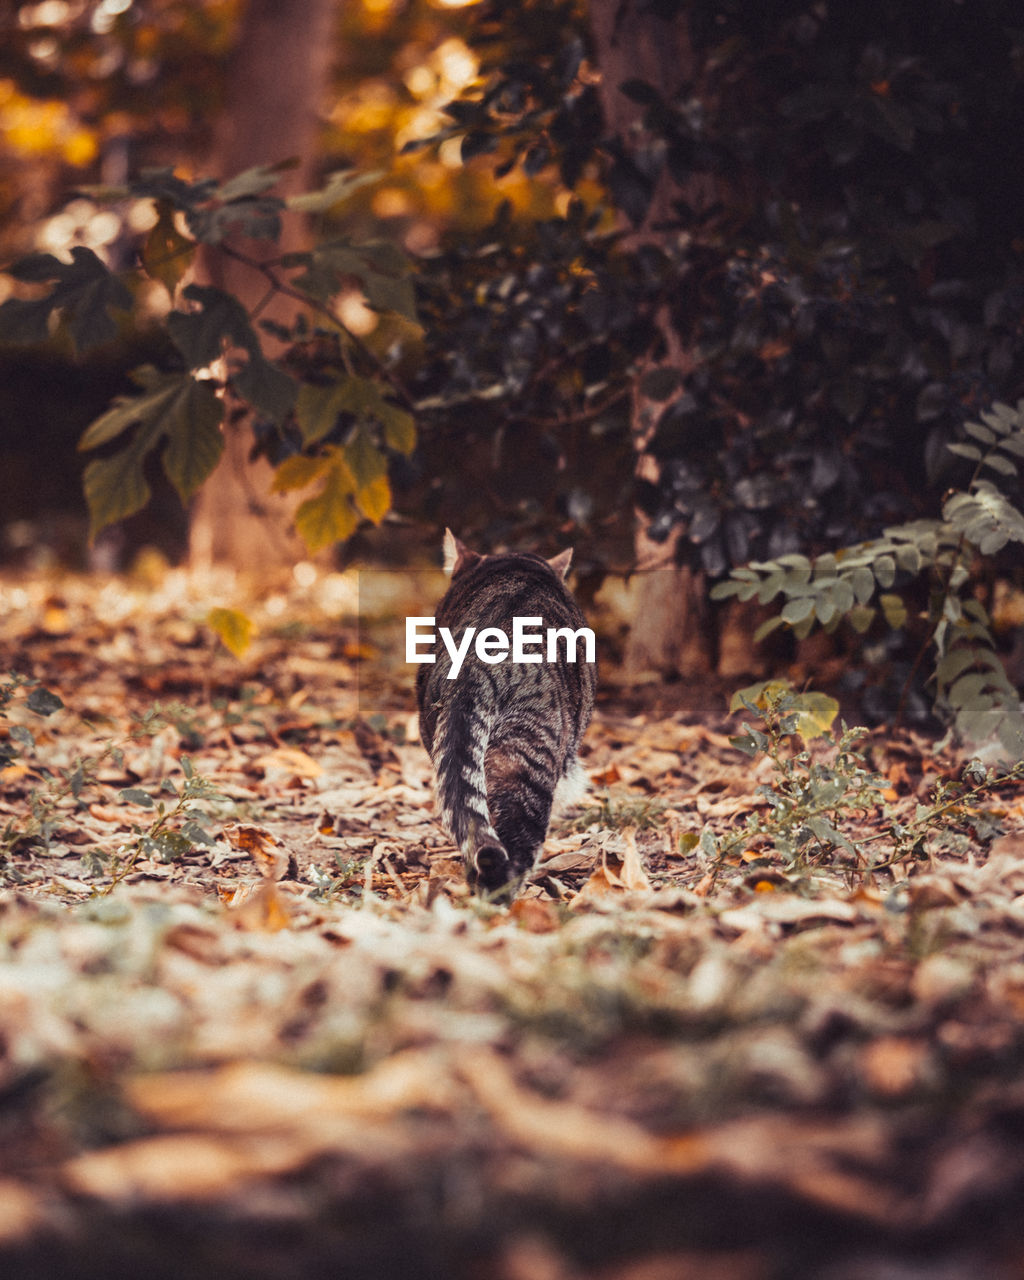 Cat looks at falling leaves during golden autumn